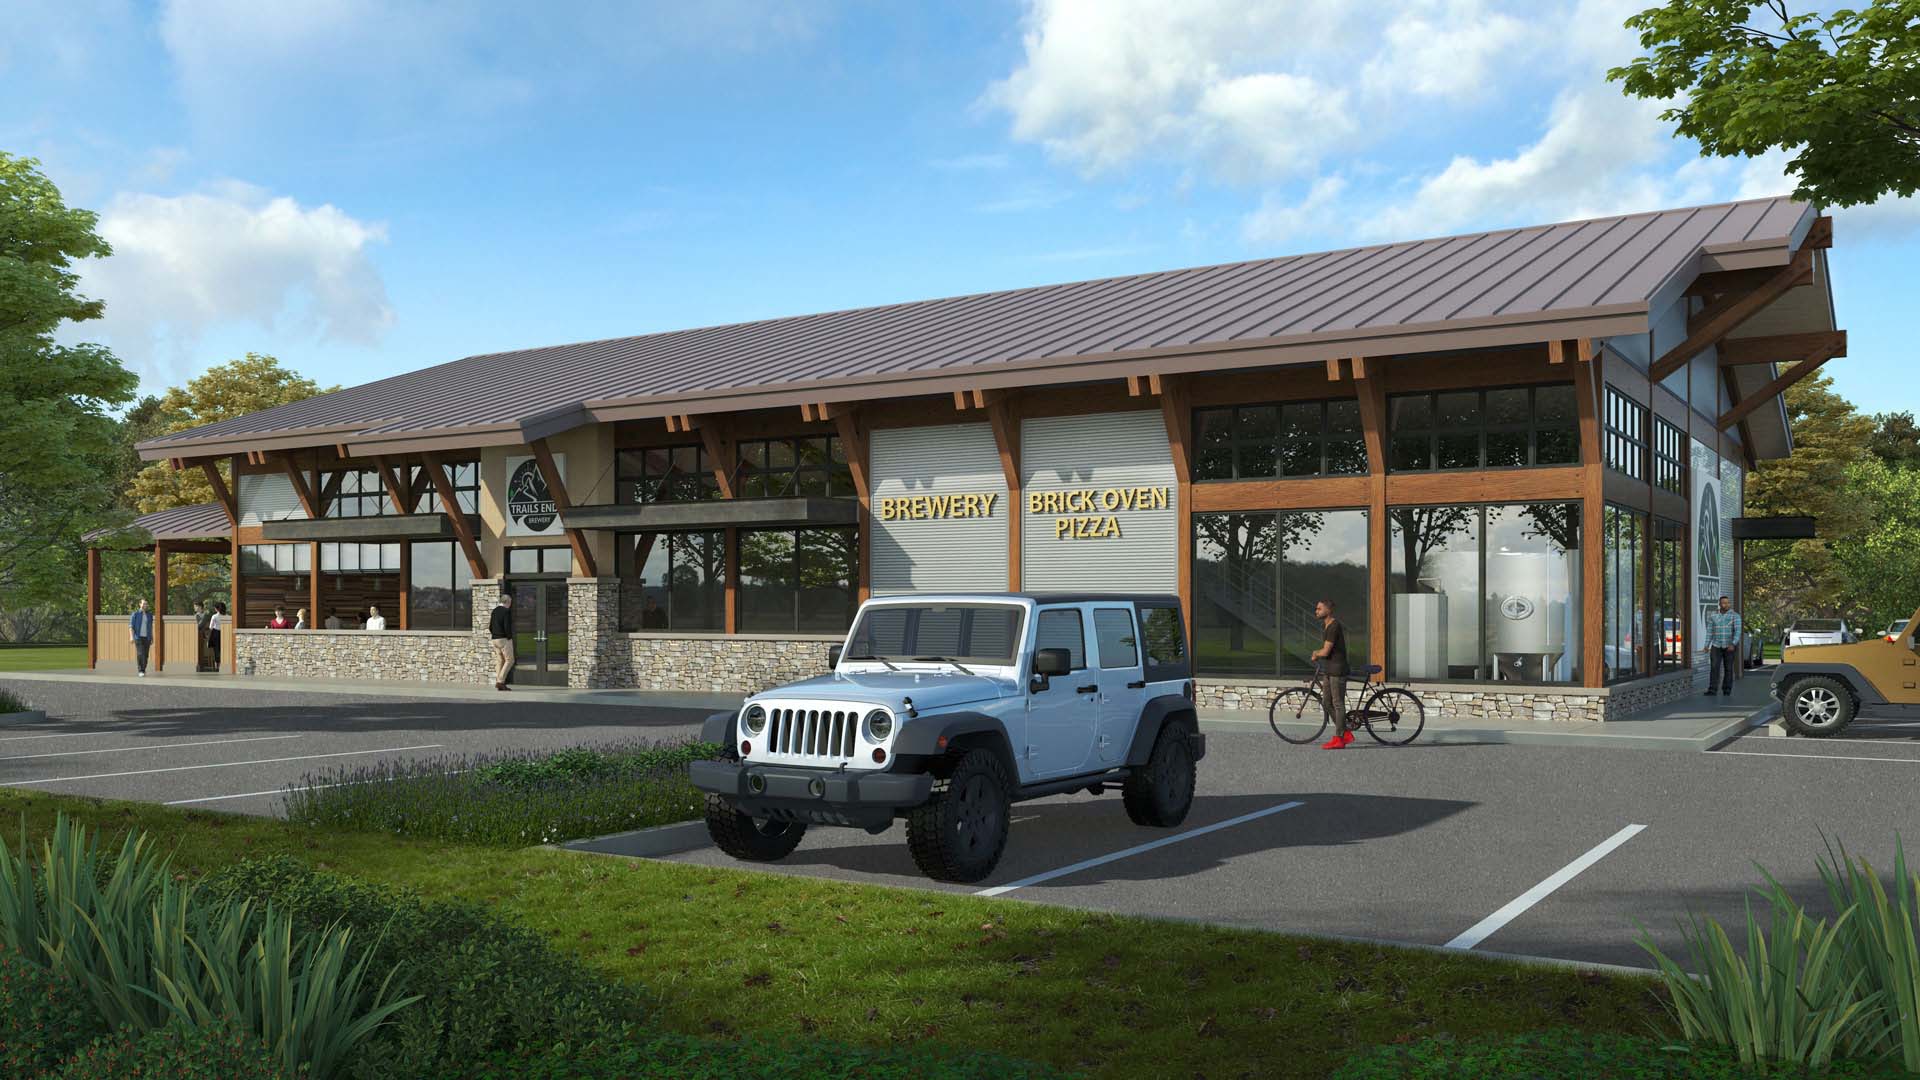 Trails End Pub and Brewery - Commercial - Elevations 3885-TrailsEndPubandBrewery.jpg